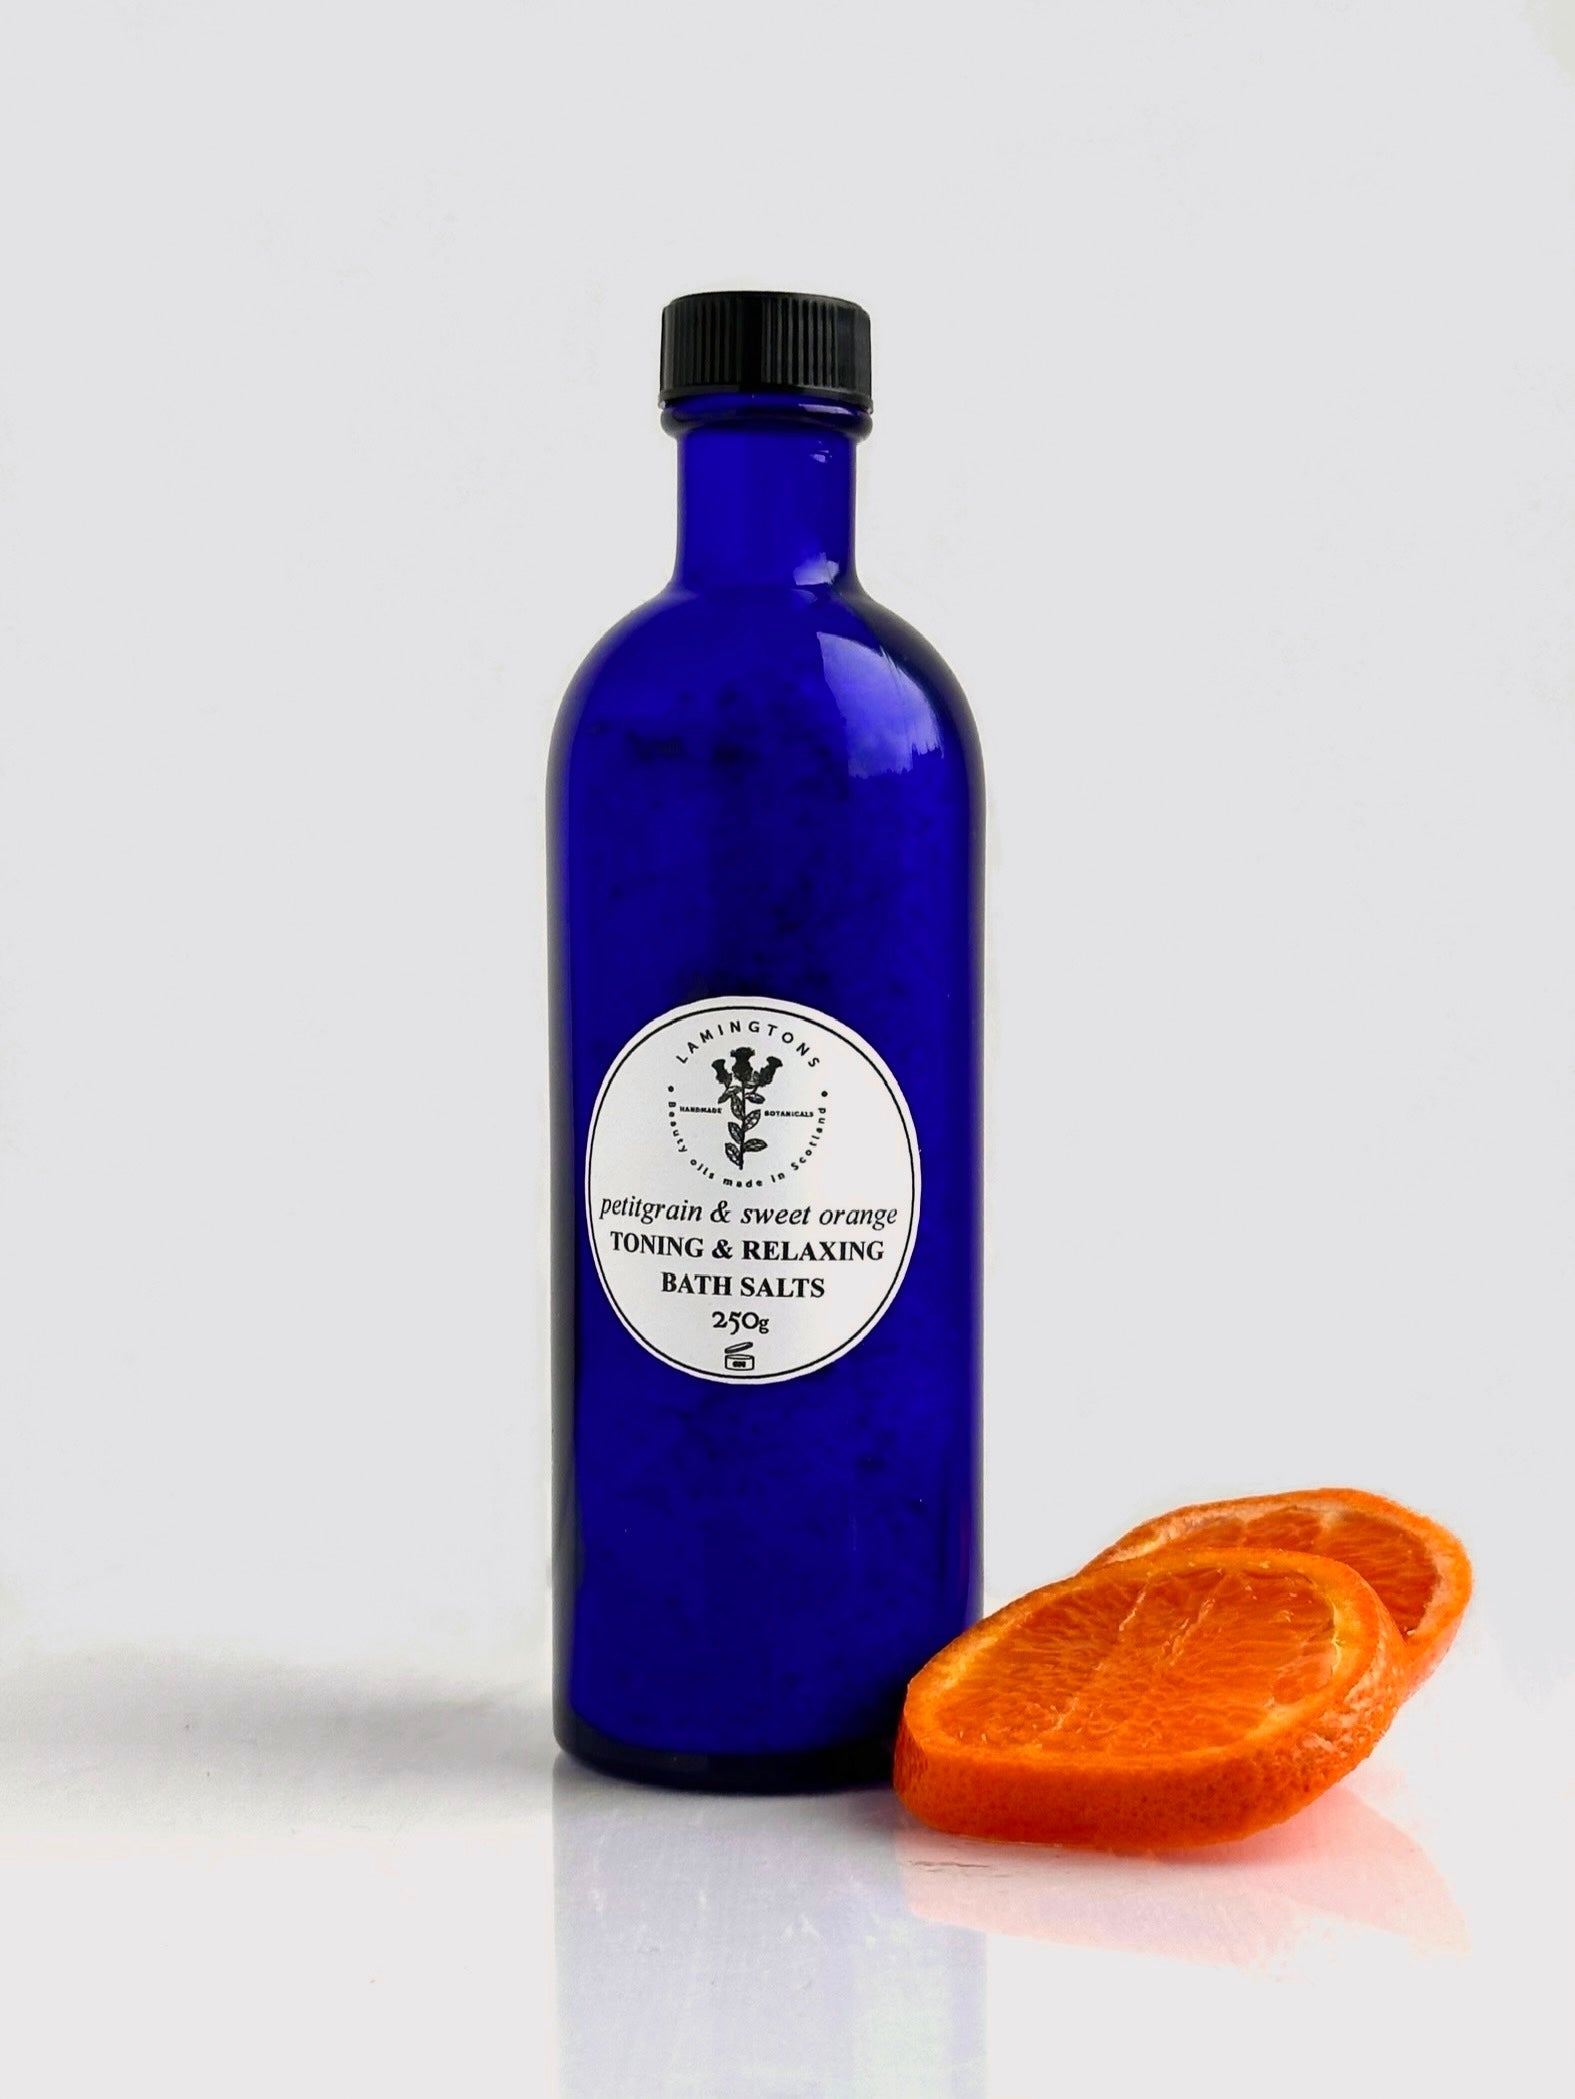 A bottle of petitgrain and sweet orange toning and relaxing bath salts.